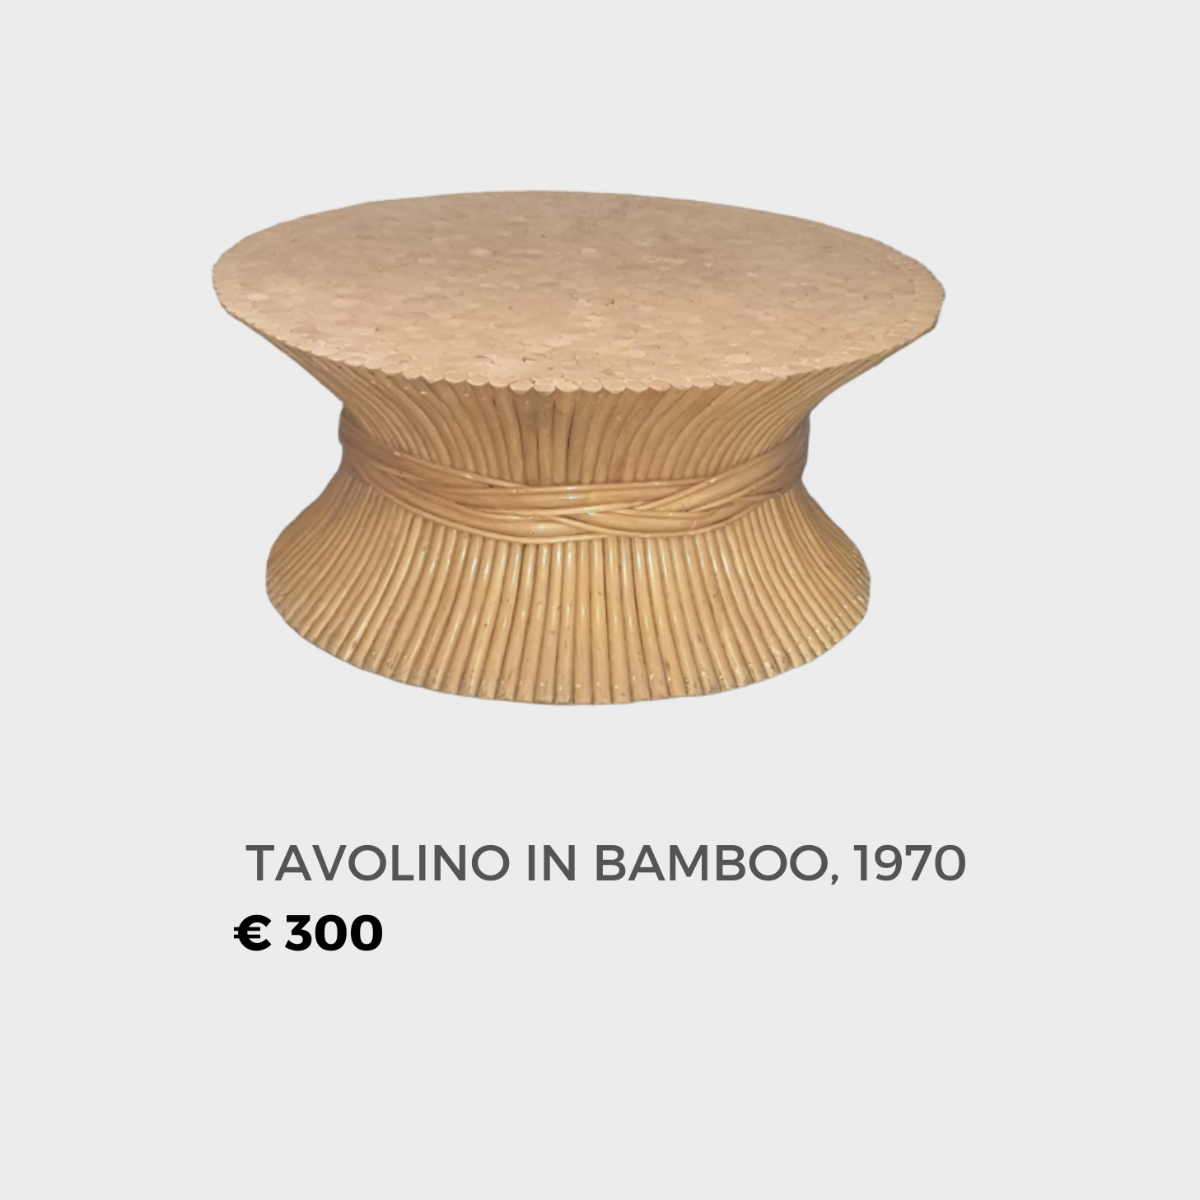 TAVOLINO IN BAMBOO BY MCGUIRE, 1970